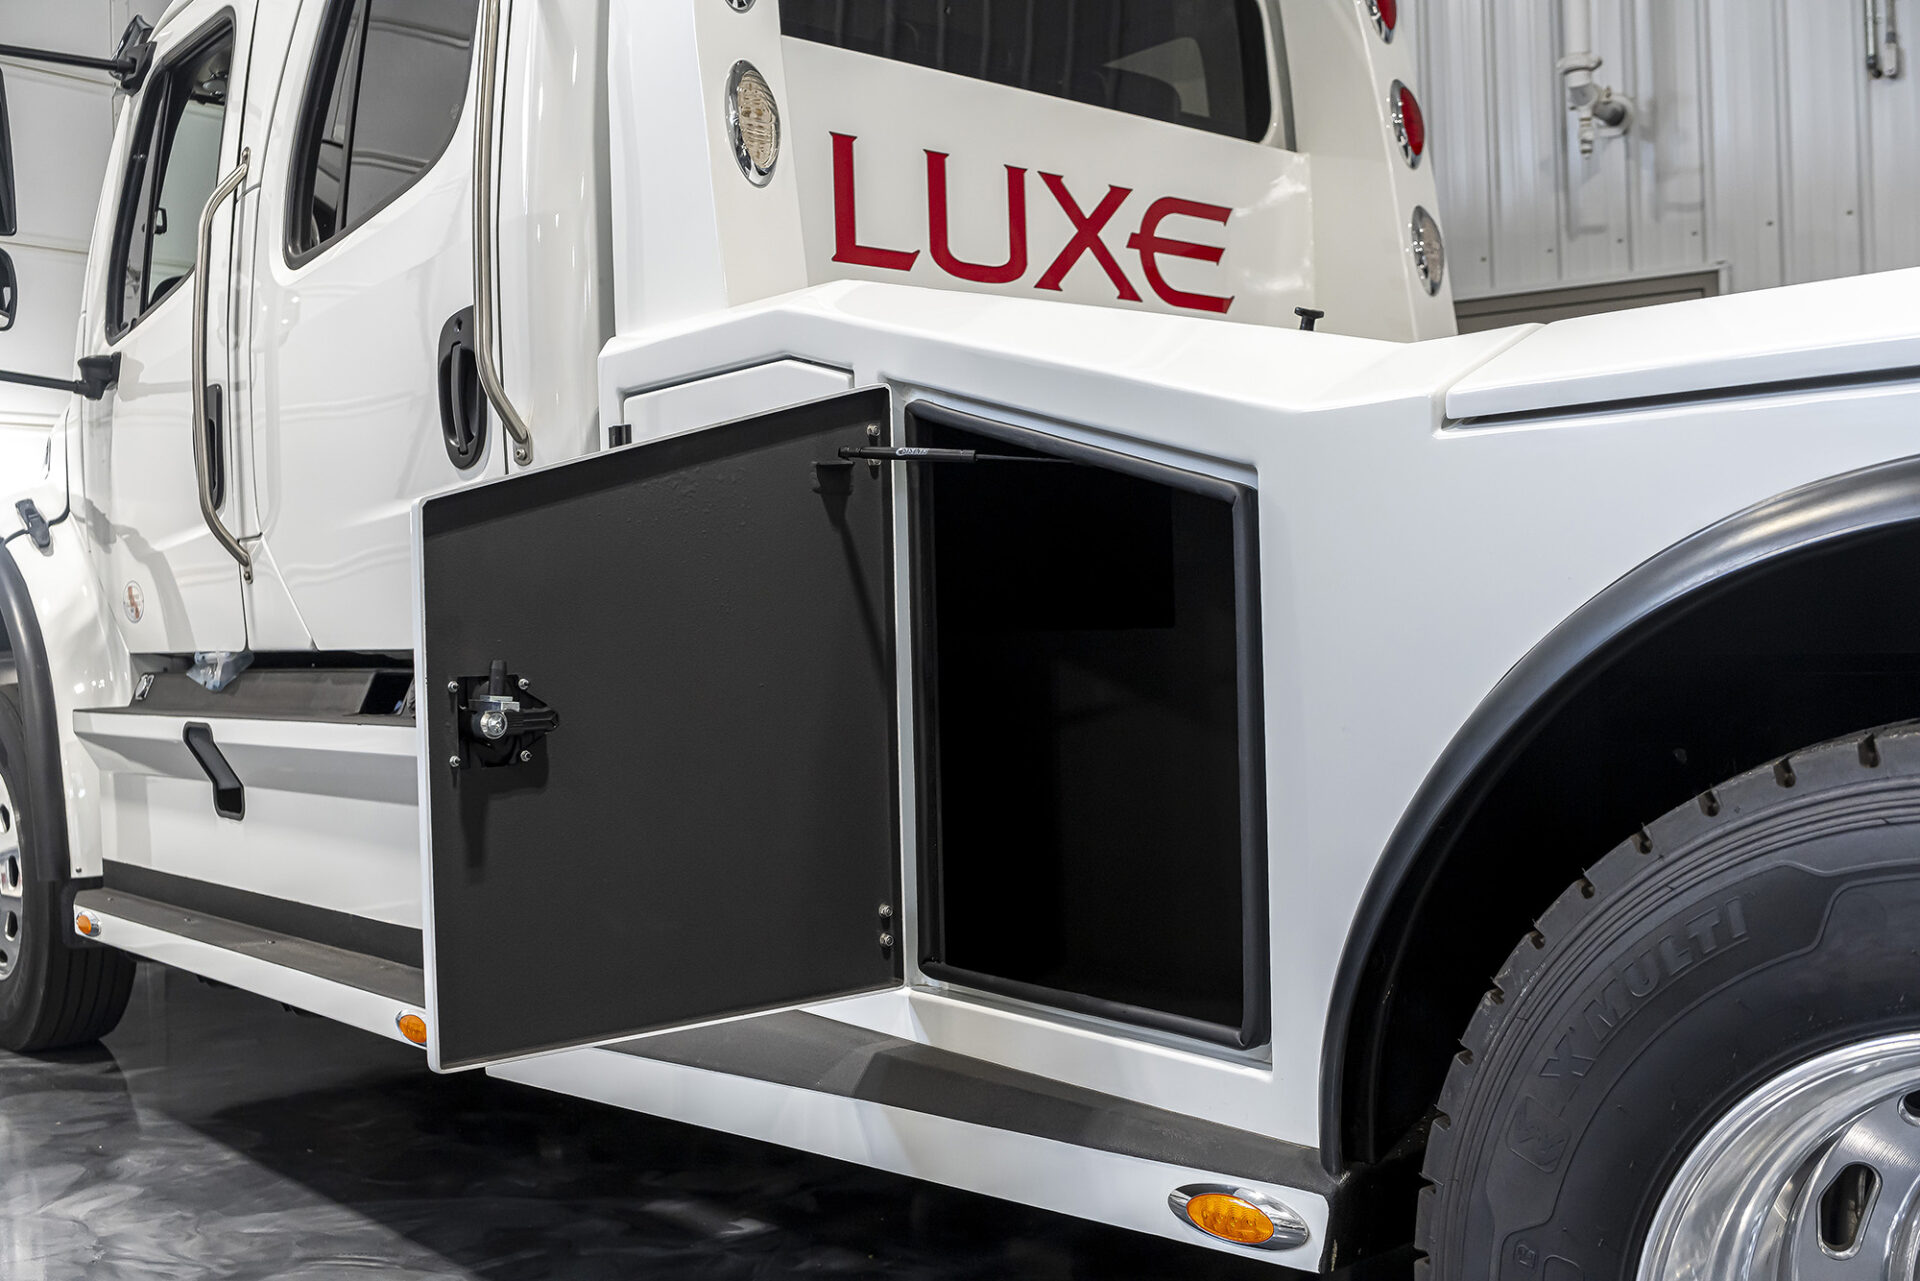 White Freightliner M2-106 with a hauler body build by Luxe Trucks in Elkhart, Indiana.